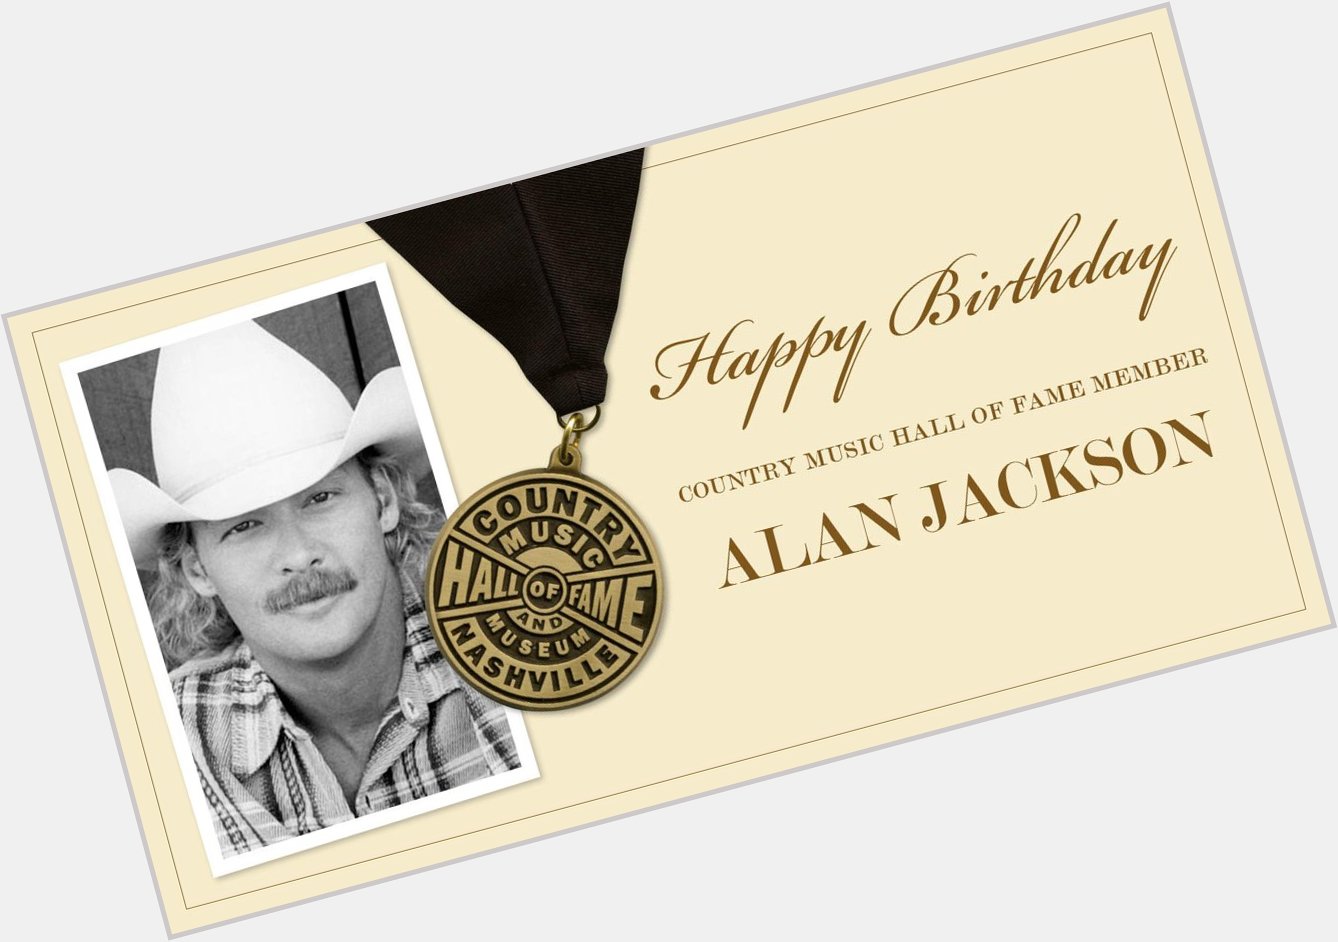 Help us wish Country Music Hall of Fame member Alan Jackson ( a very Happy Birthday! 